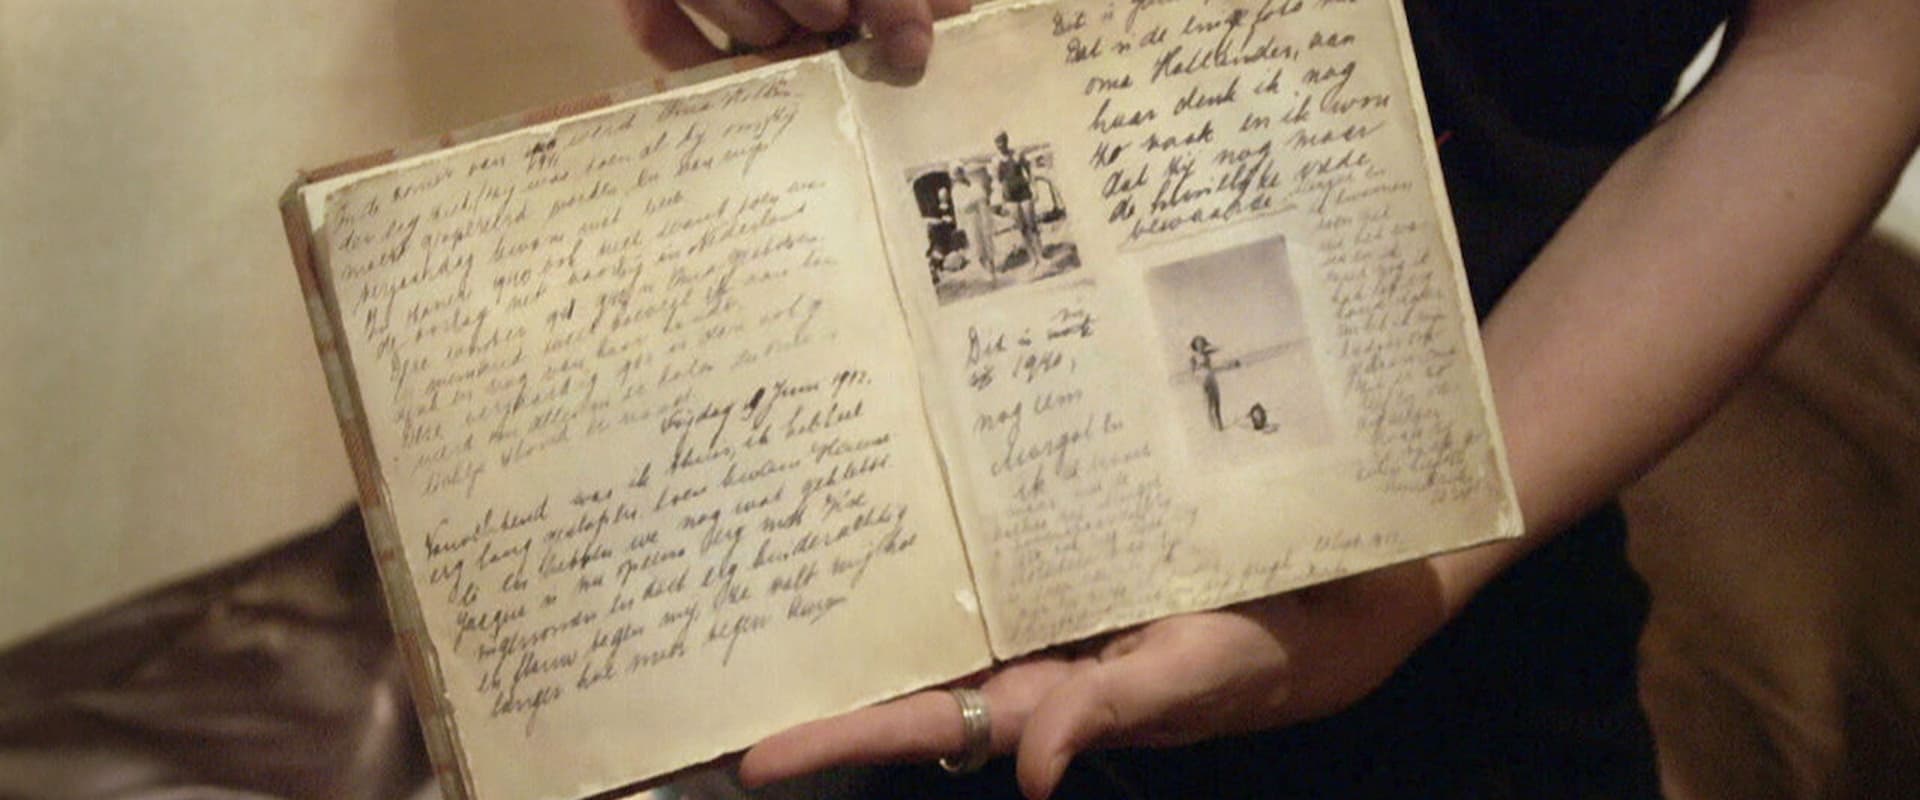 The Magic of the Diary of Anne Frank